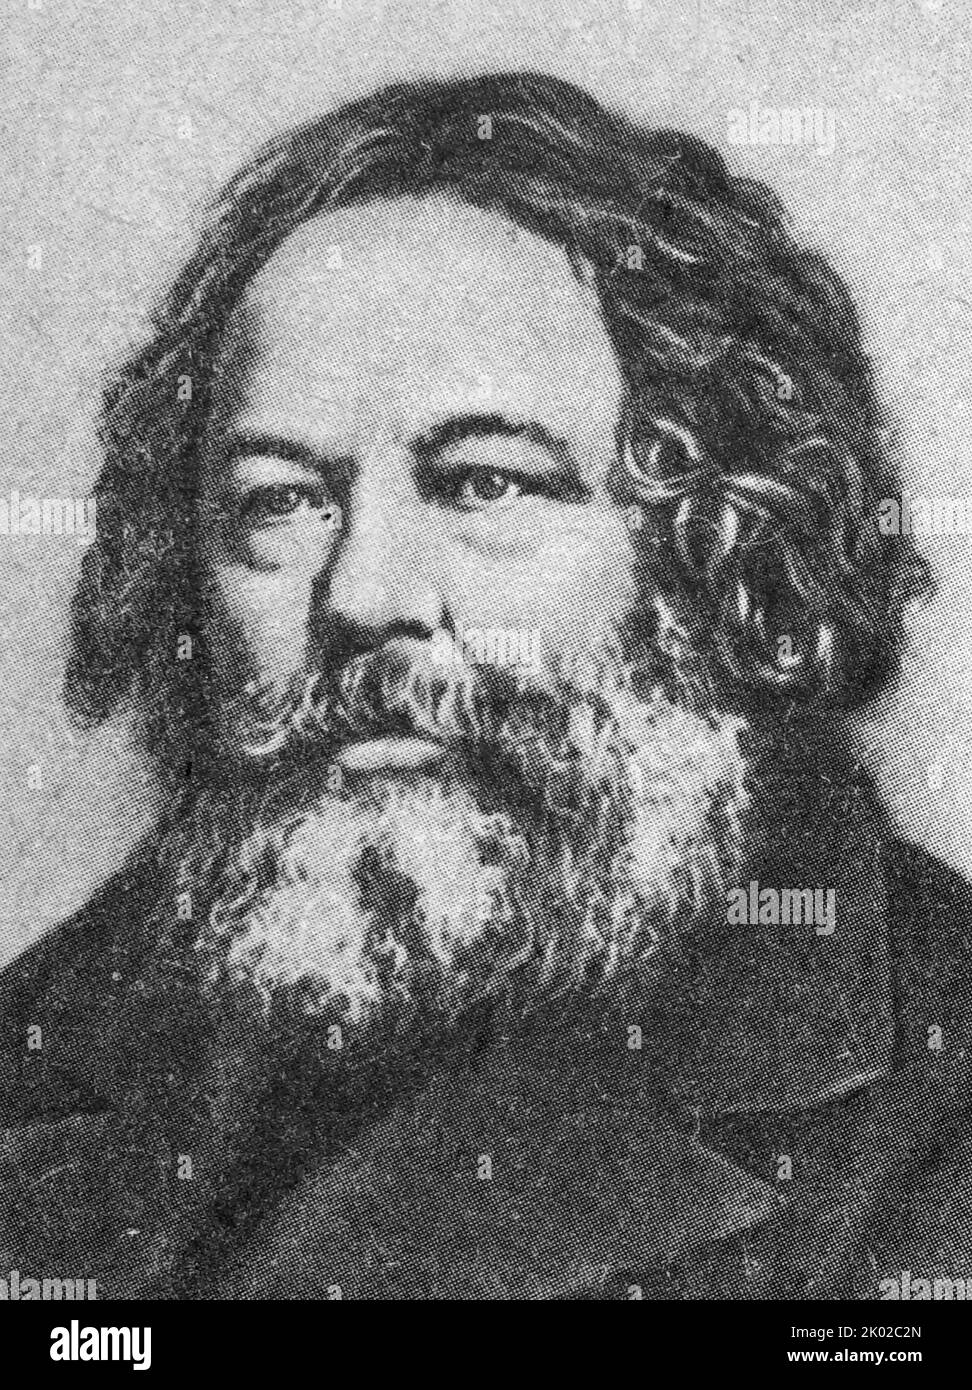 Mikhail Alexandrovich Bakunin (1814 - 1876); Russian revolutionary anarchist, socialist and founder of collectivist anarchism. He is considered among the most influential figures of anarchism and a major founder of the revolutionary socialist and social anarchist tradition Stock Photo